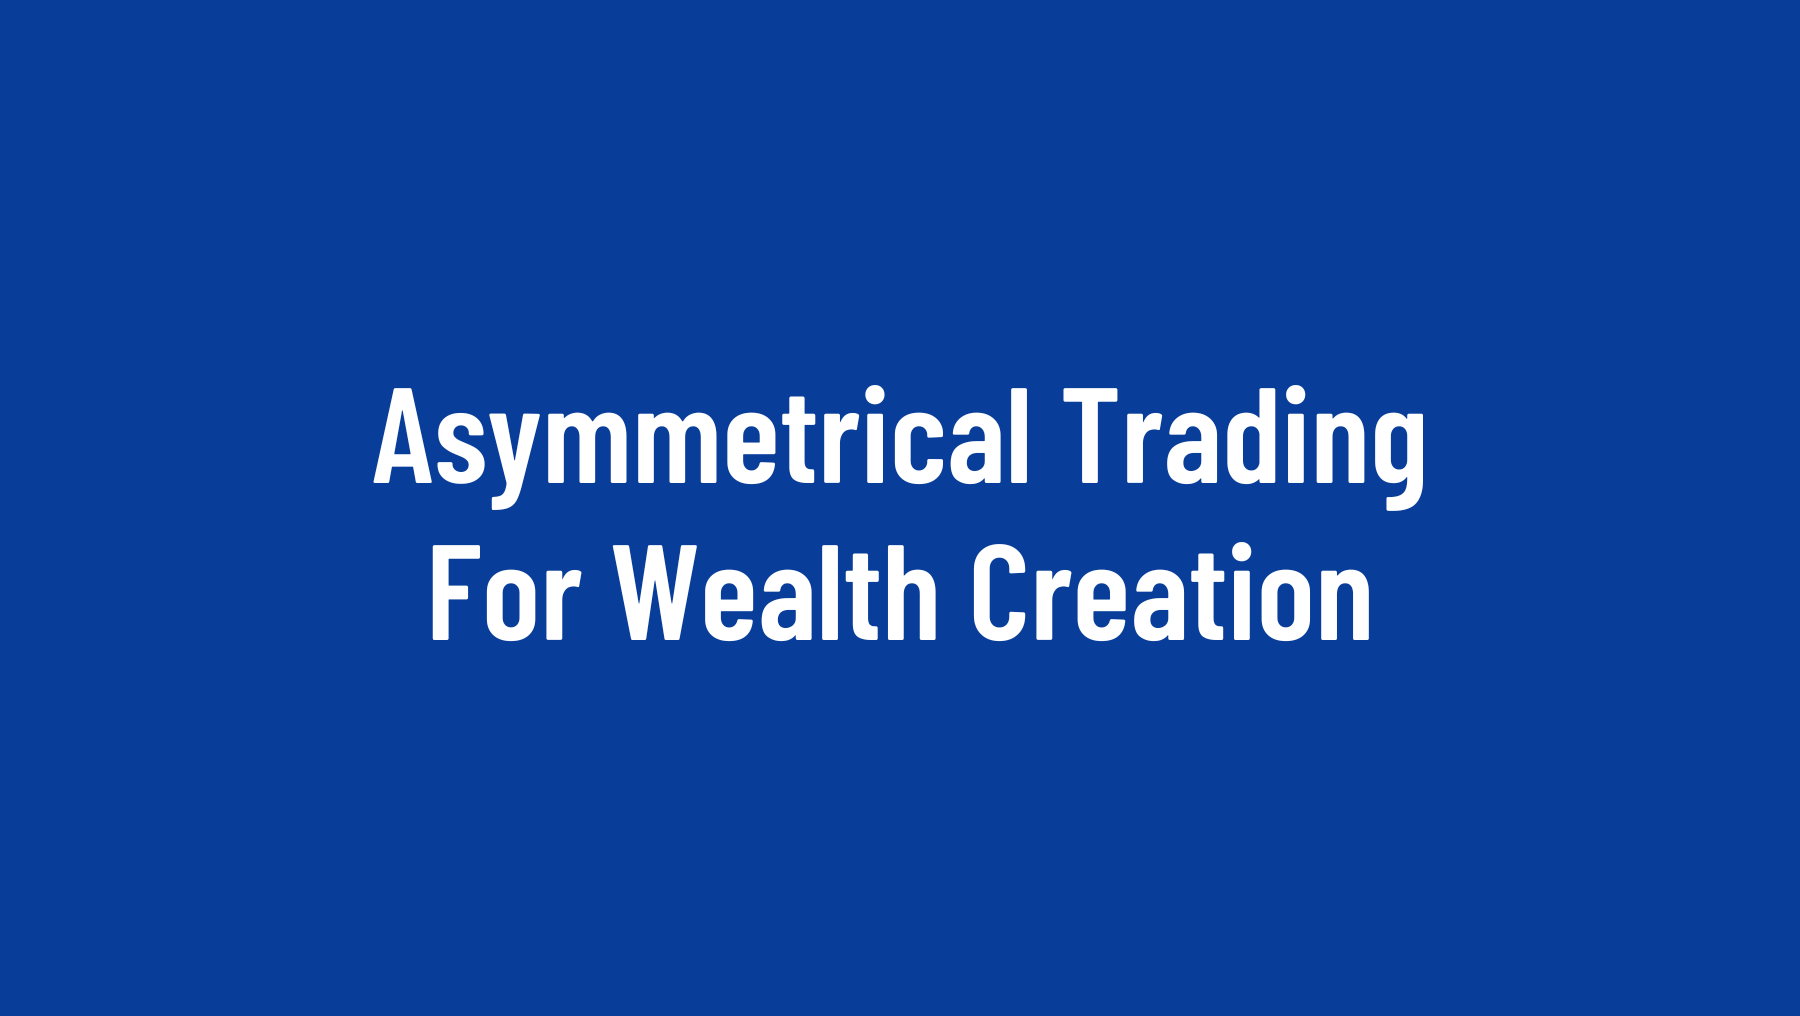 Asymmetrical Trading For Wealth Creation